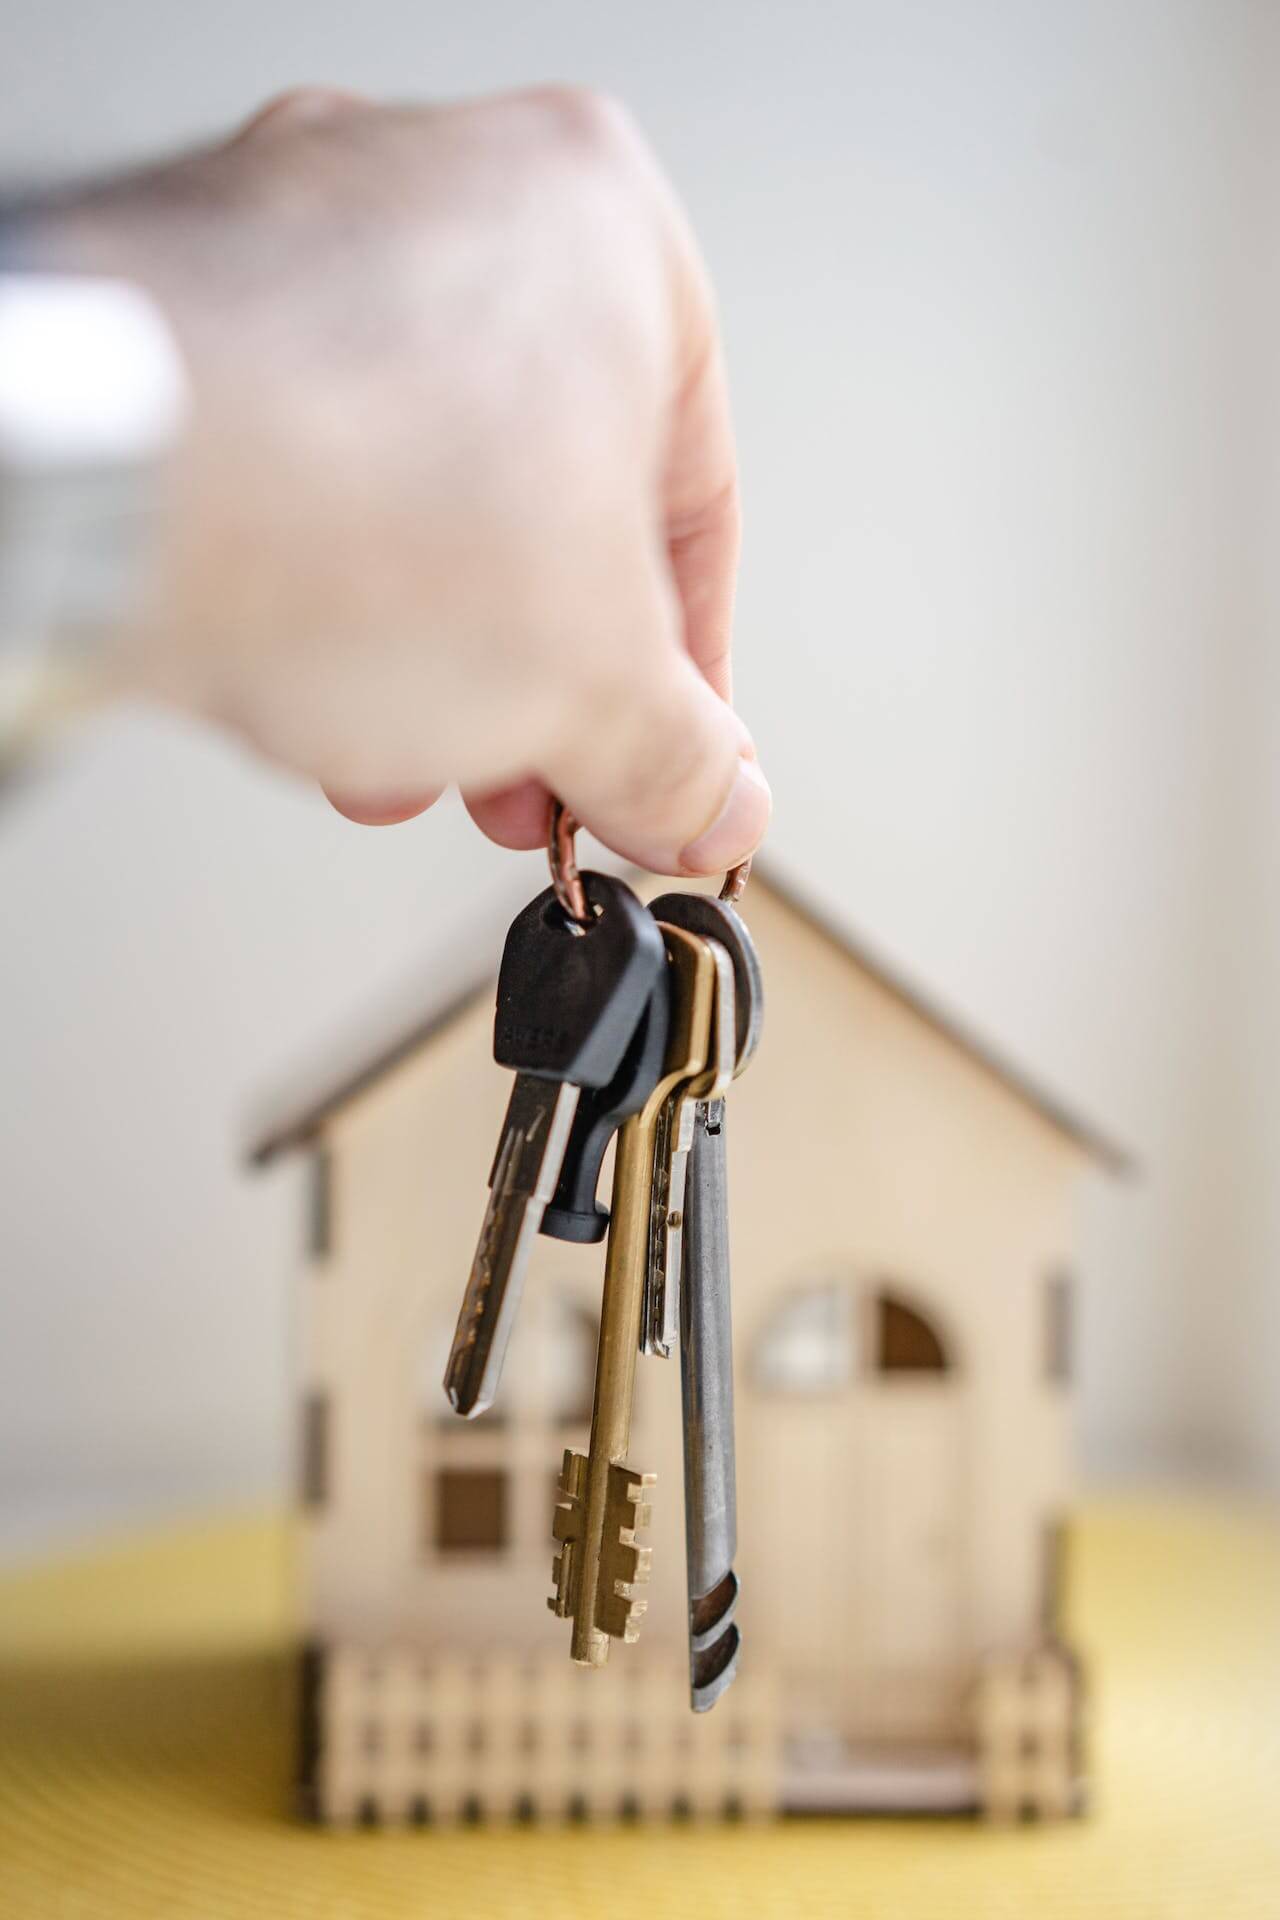 A set of keys held in the foreground with a house in the background